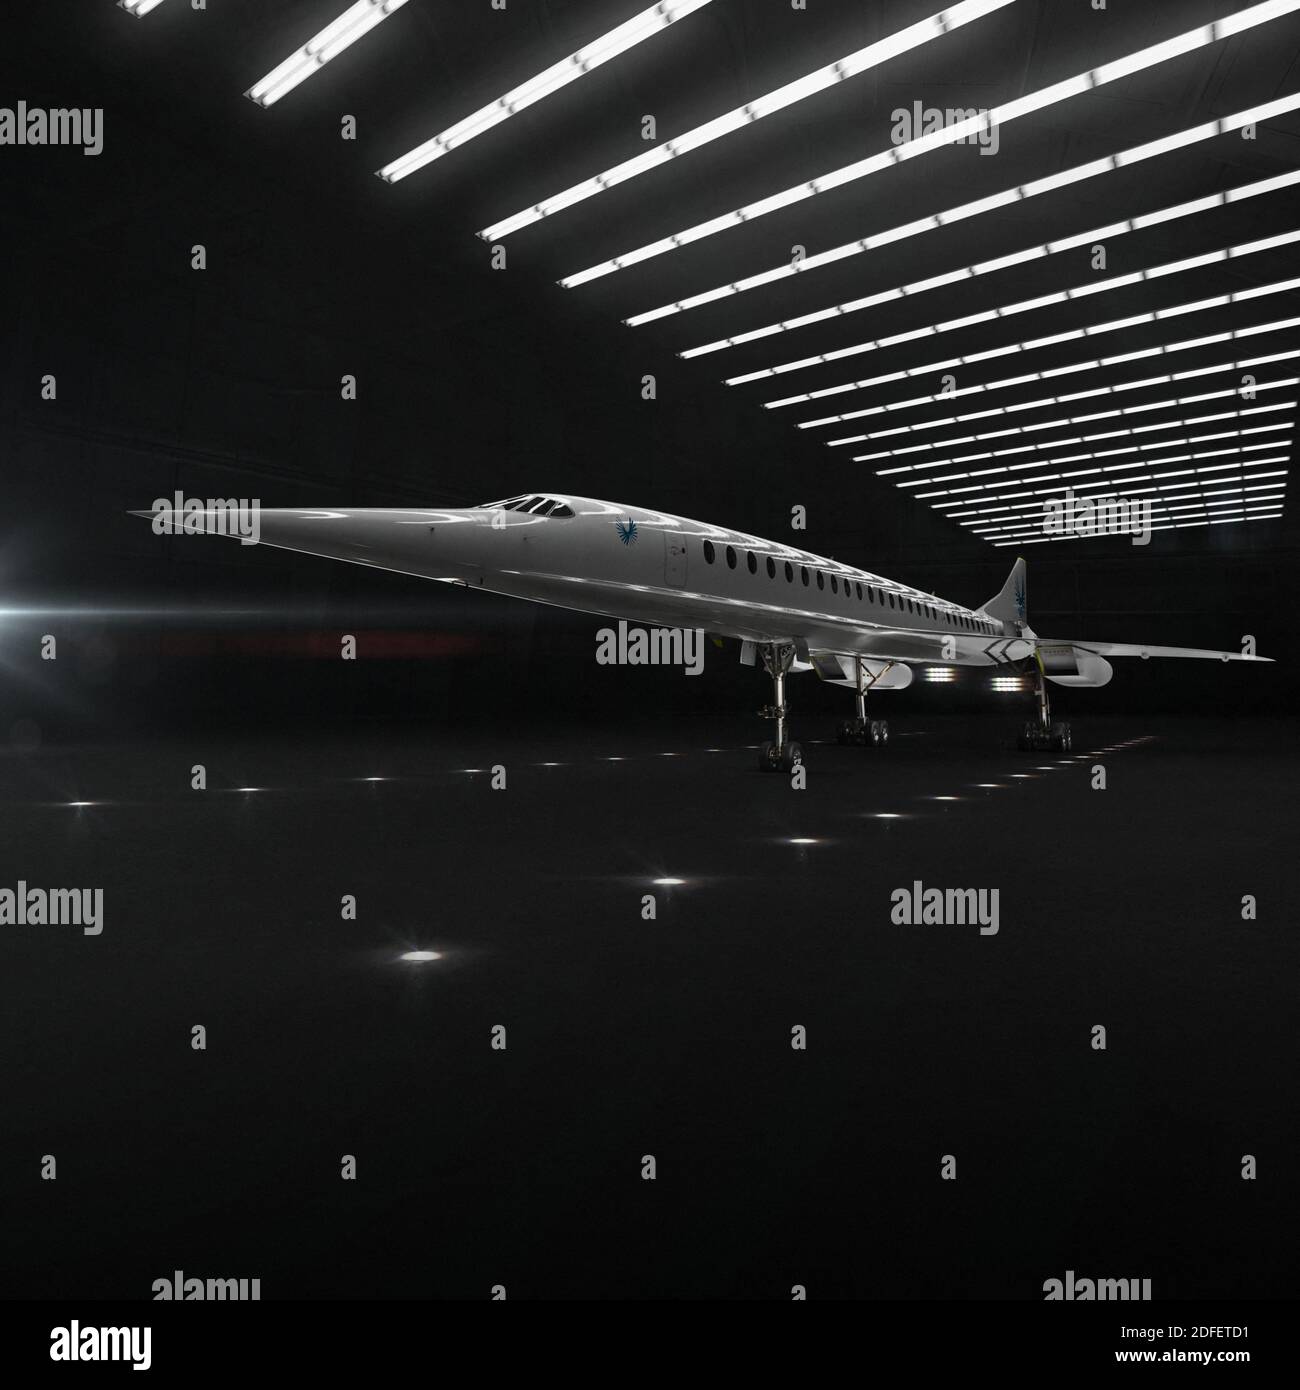 Hand out photo of a a rendering of supersonic commercial jet Overture, which is currently in development. Over 50 years after Concorde first took to the skies, a brand new supersonic jet is preparing for lift off. Denver based start-up Boom Supersonic has announced it will roll out XB-1, a 1:3 scale prototype of its upcoming supersonic commercial jet Overture, on October 7, with test flights beginning in 2021. The move will help to pave the way for the first commercial supersonic flights since the legendary delta-wing passenger airliner made its last flight in 2003. 'XB-1 is the first step in Stock Photo